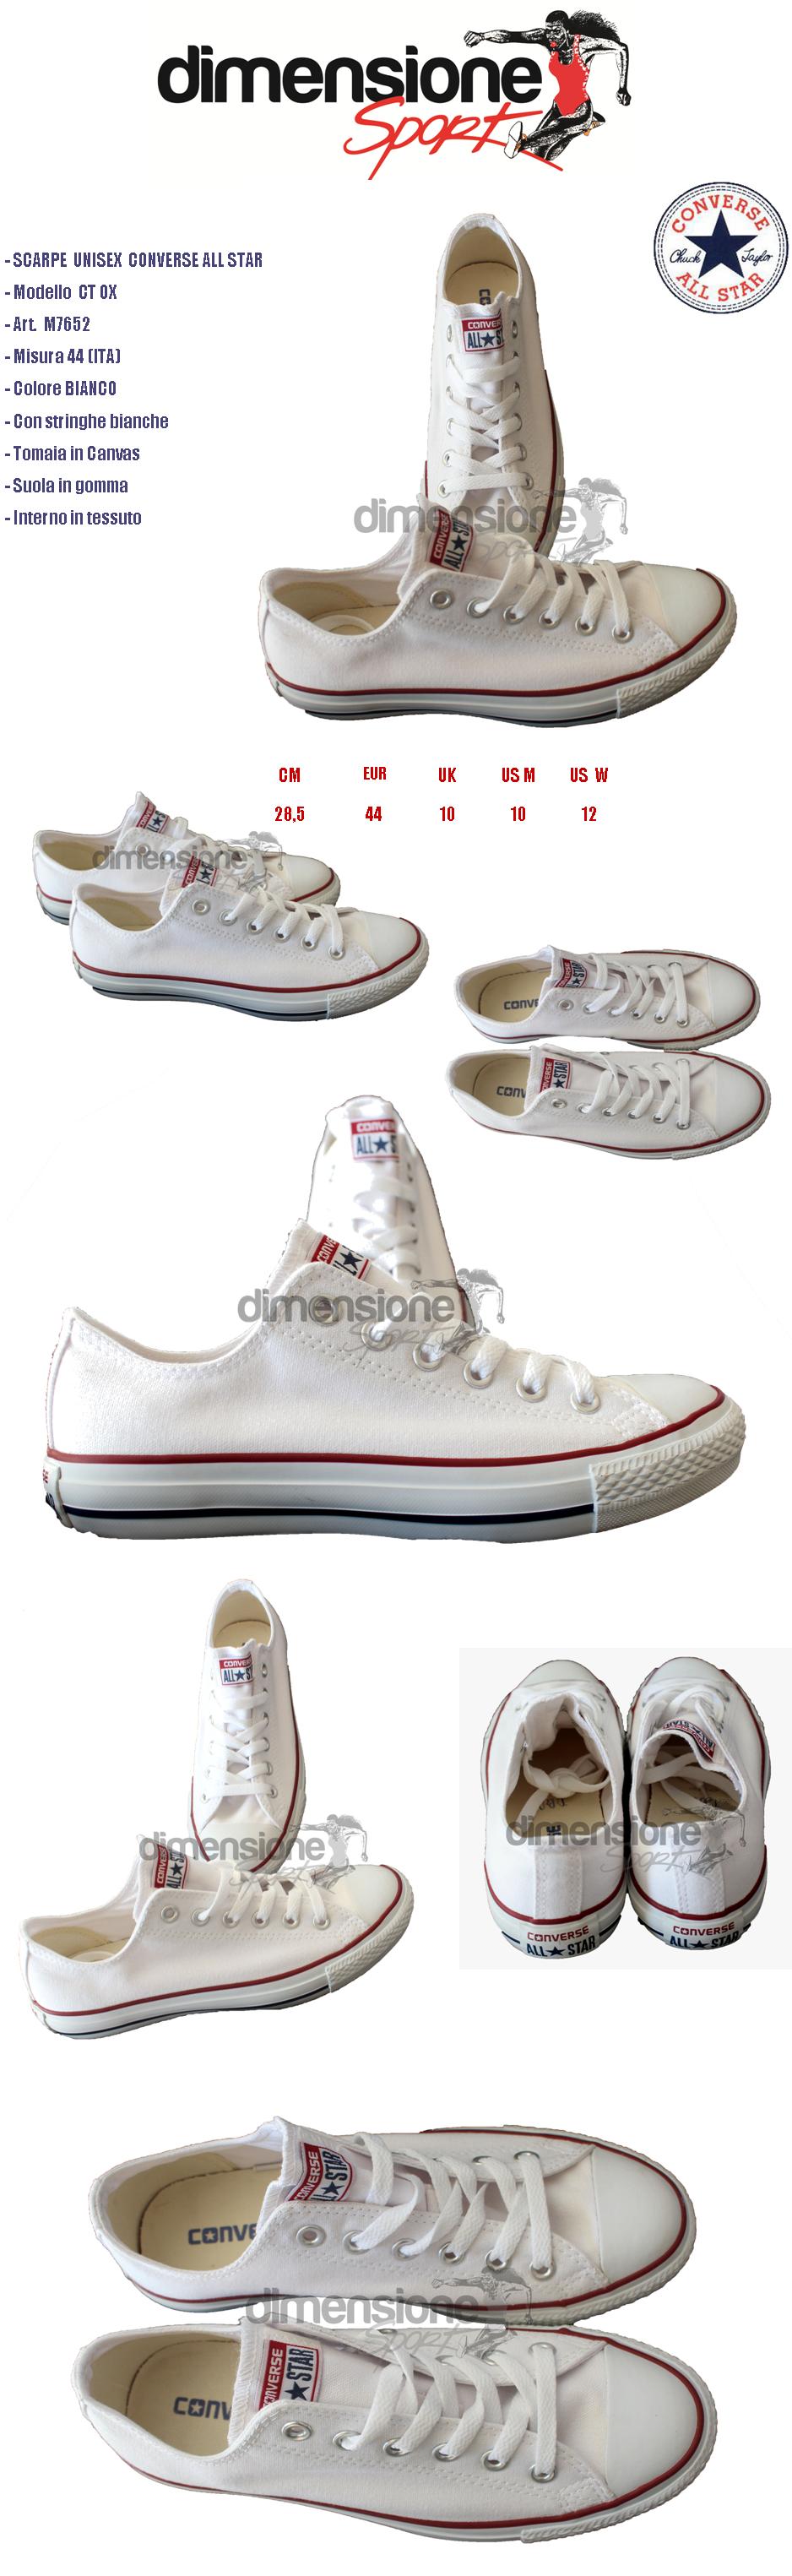 Converse All Star Low White Diapers 44 m7652 Unisex Shoes Canvas Shoes US  10 | eBay